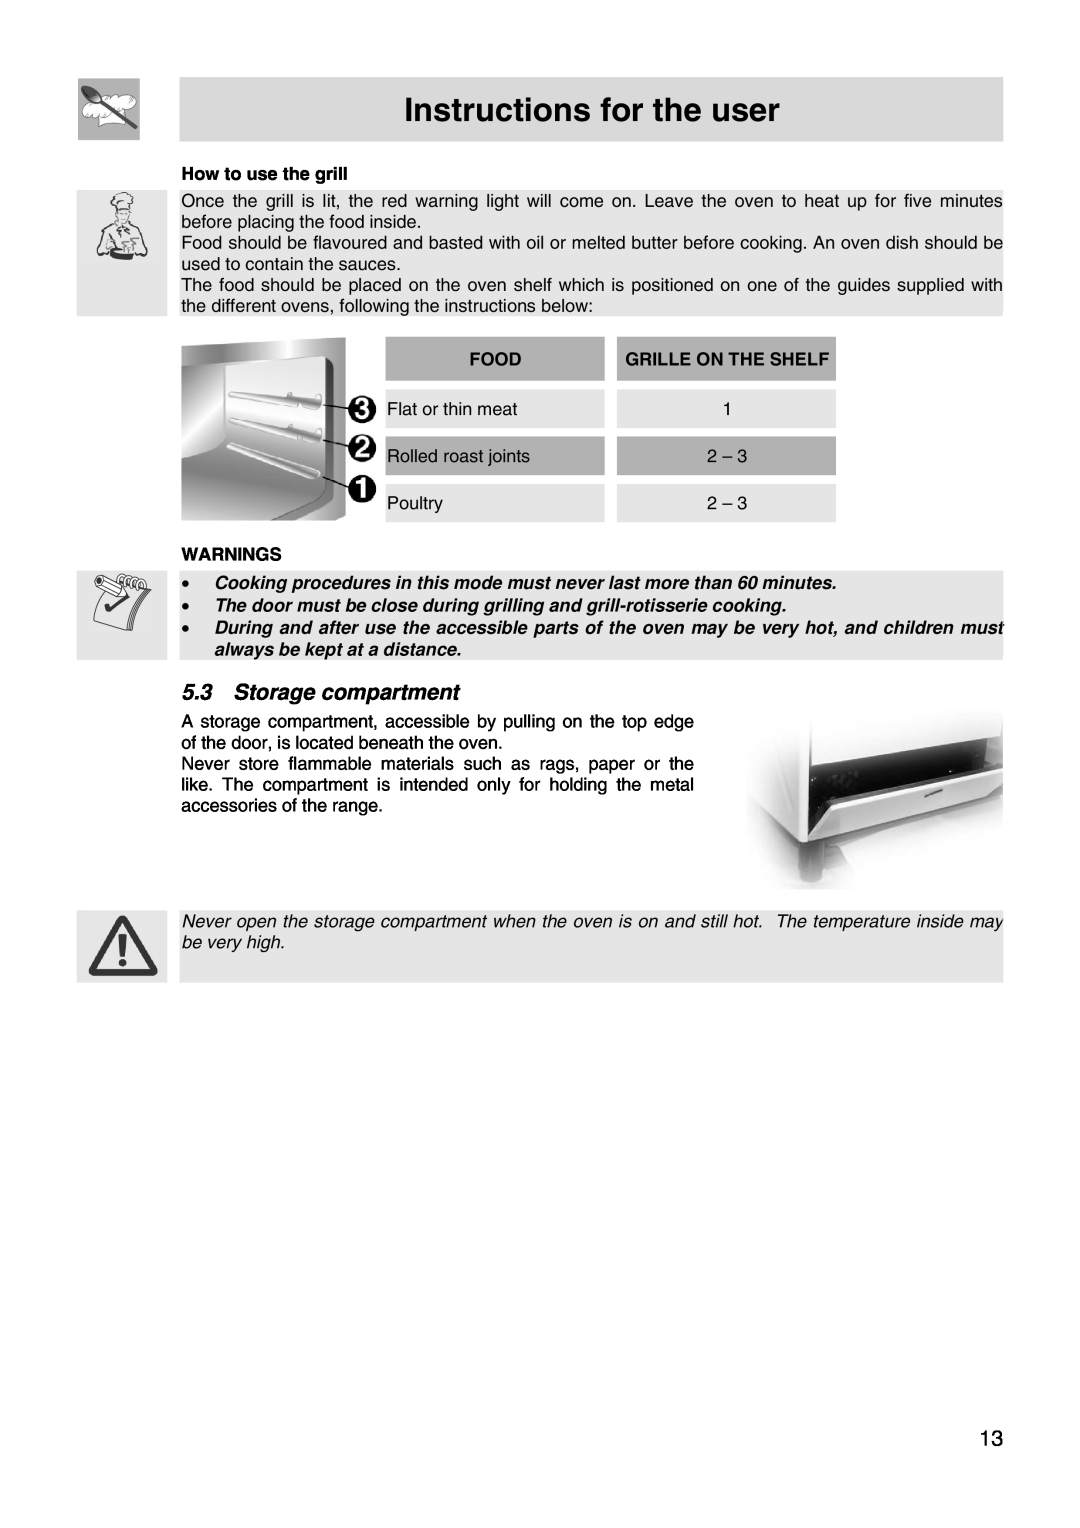 Smeg FS66MFX Storage compartment, Instructions for the user, How to use the grill, Food, Grille On The Shelf, Warnings 